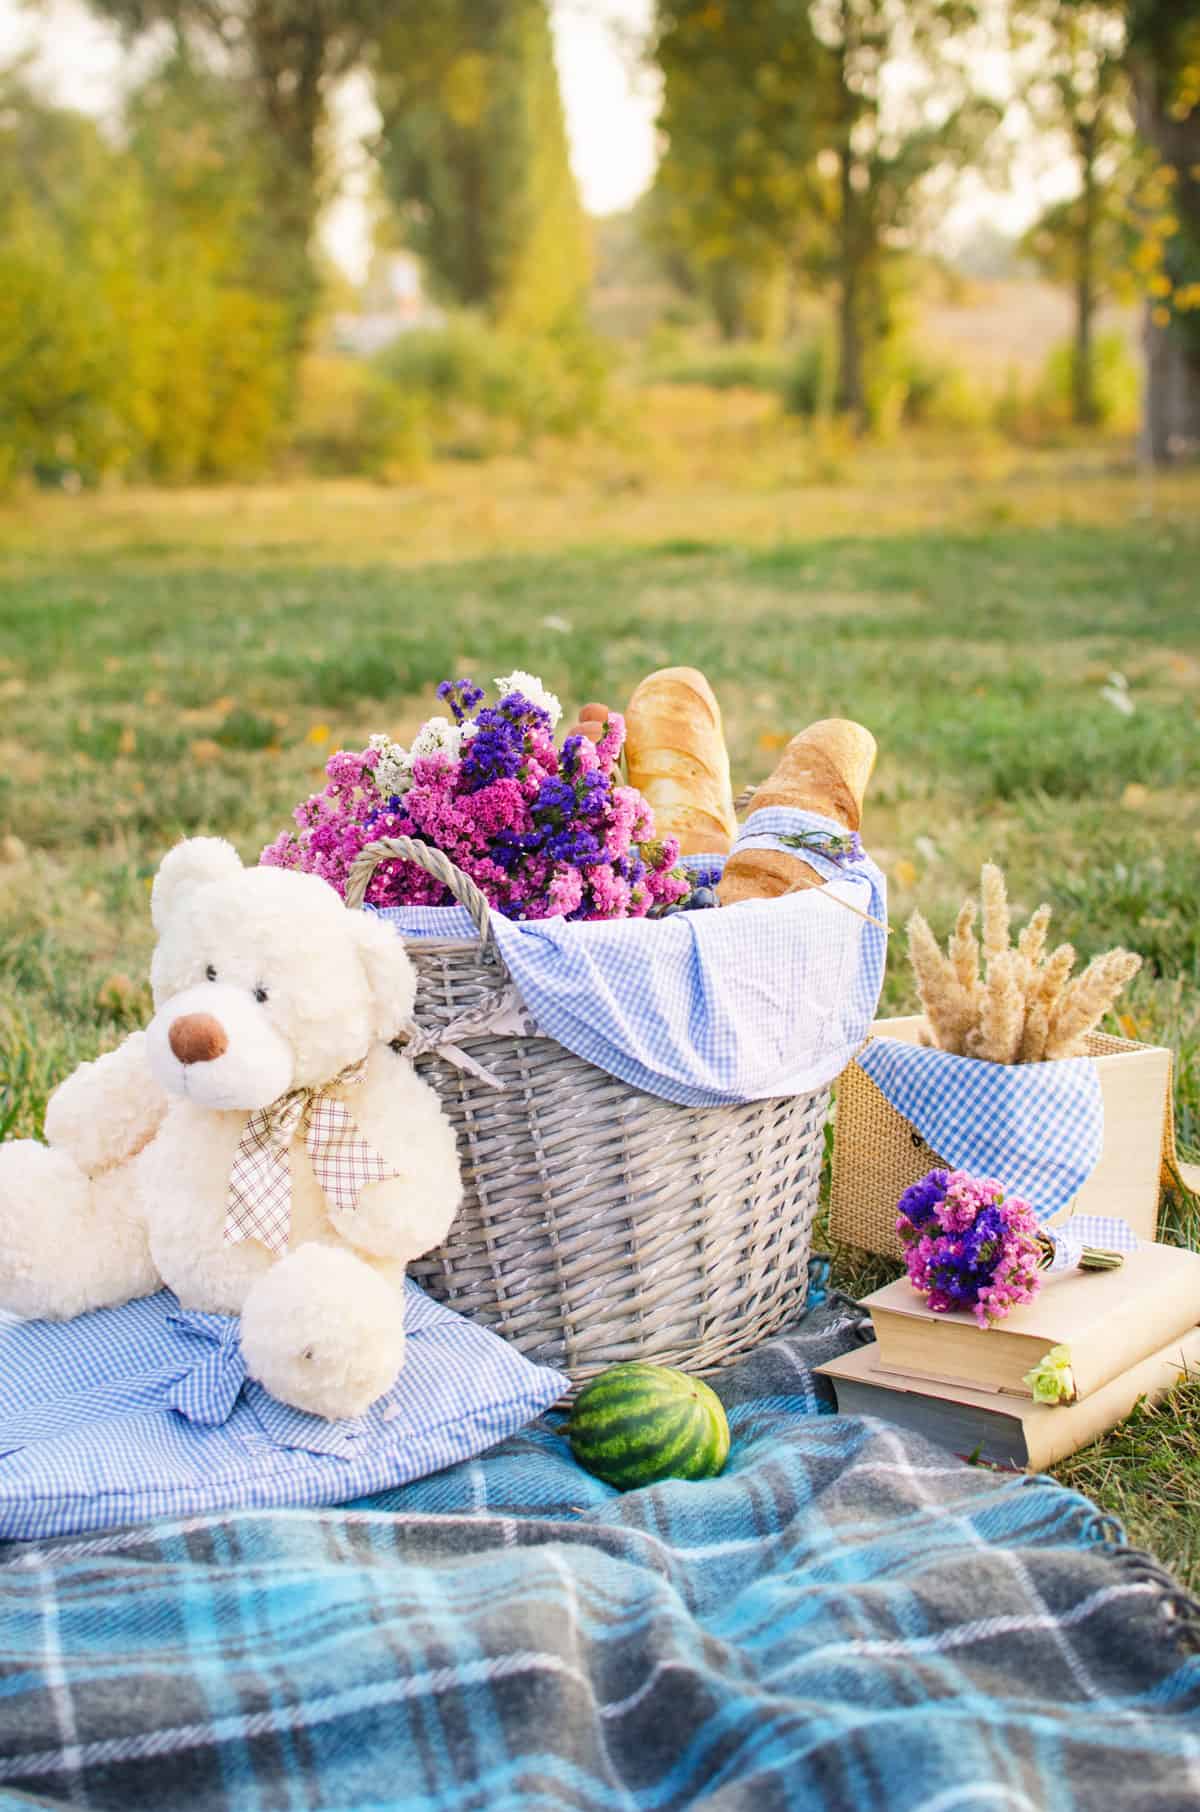 Picnic basket with flowers, bread and a teddy bear.